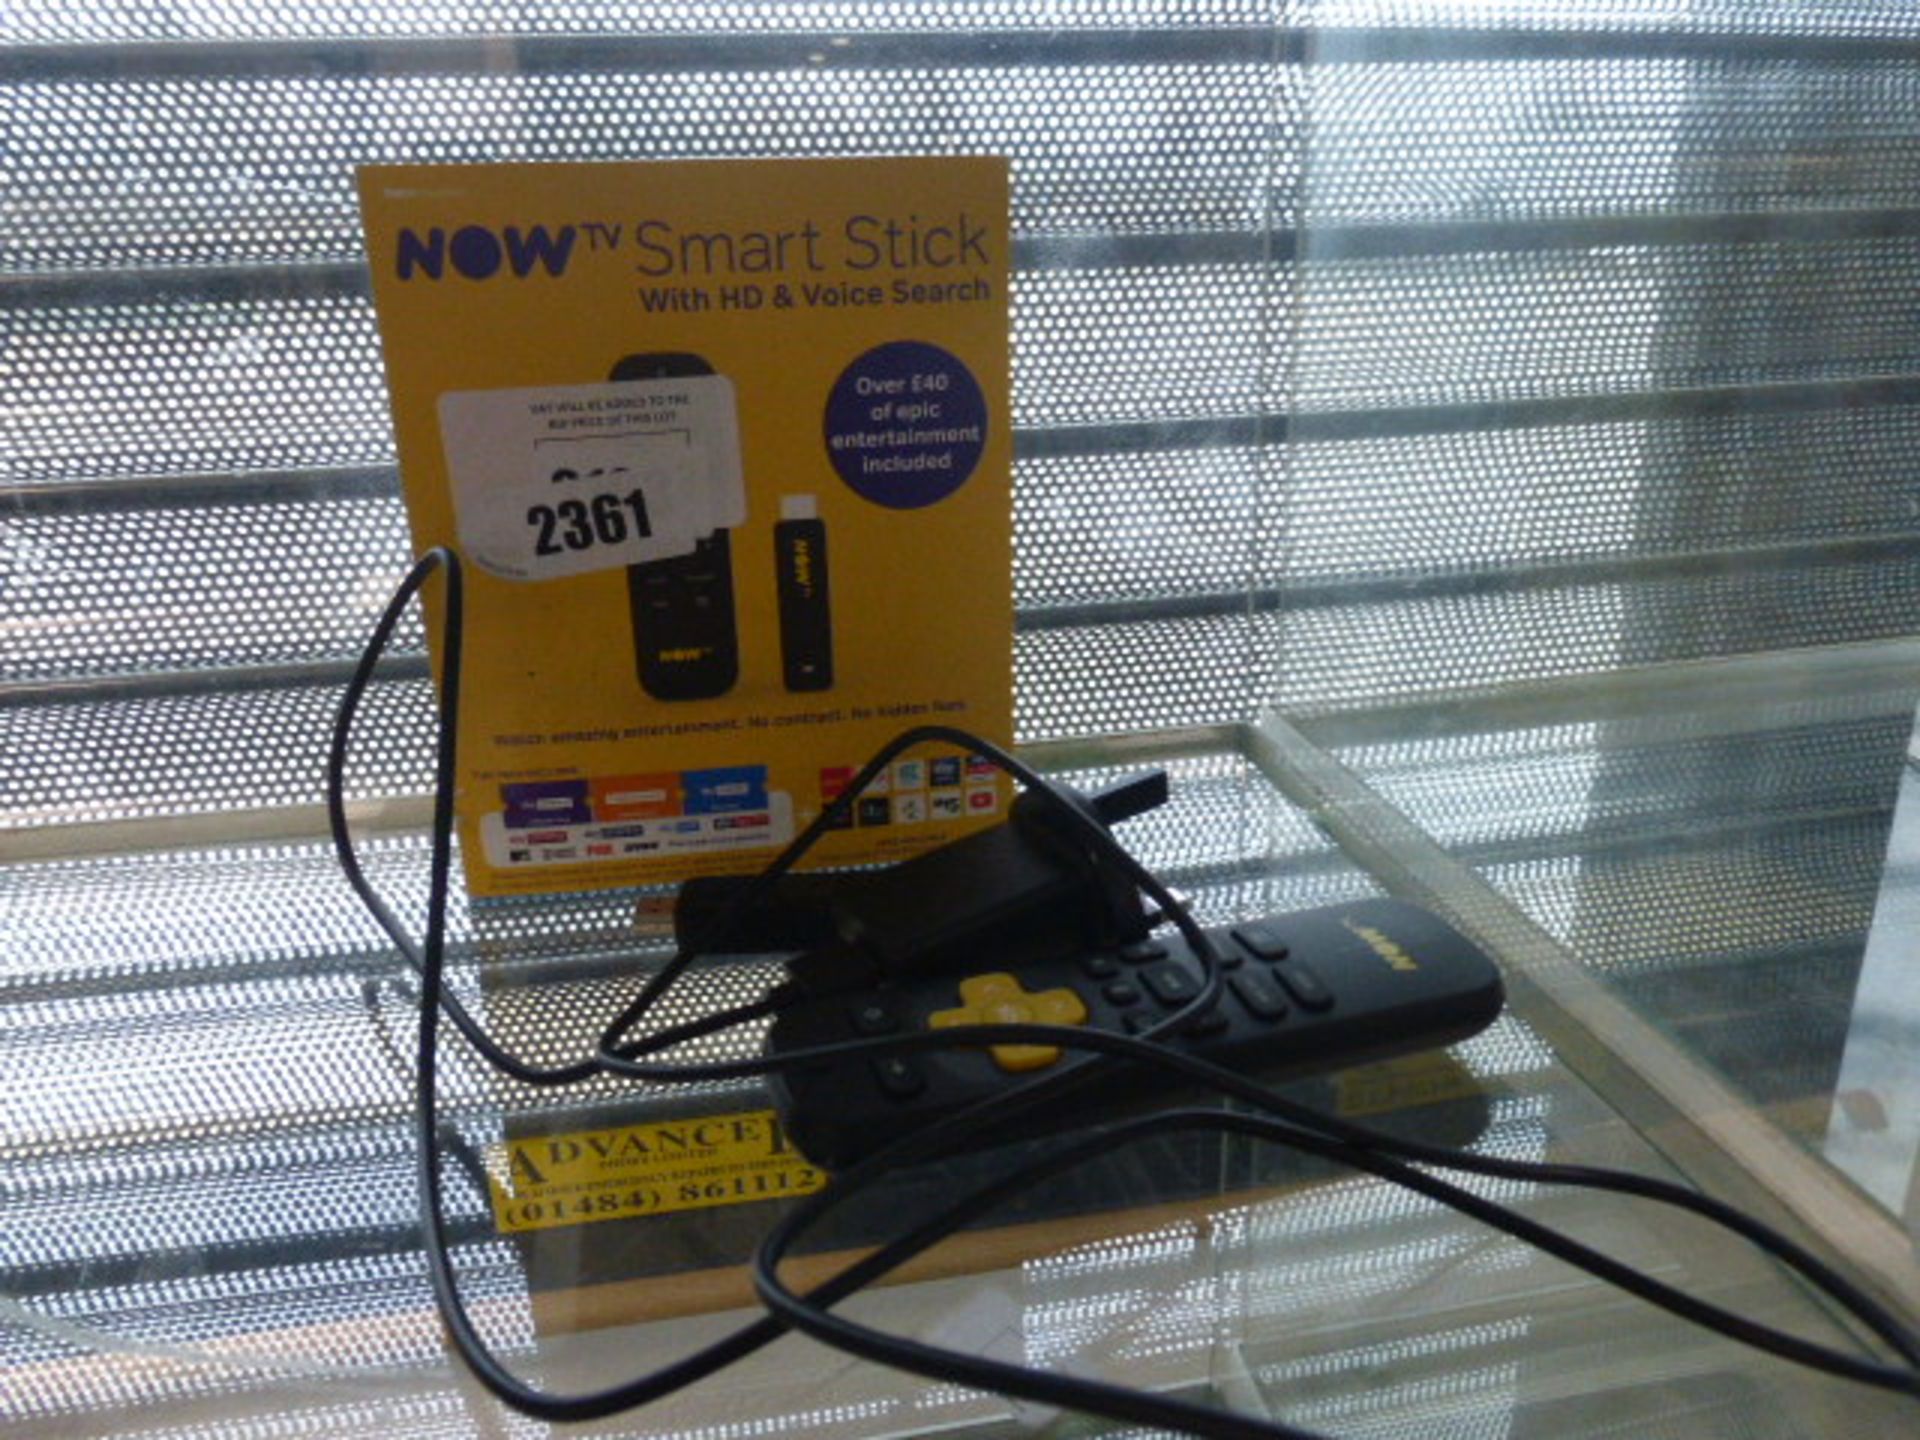 2103 - Now TV Smart Stick in box, with a loose TV Smart Stick and remote